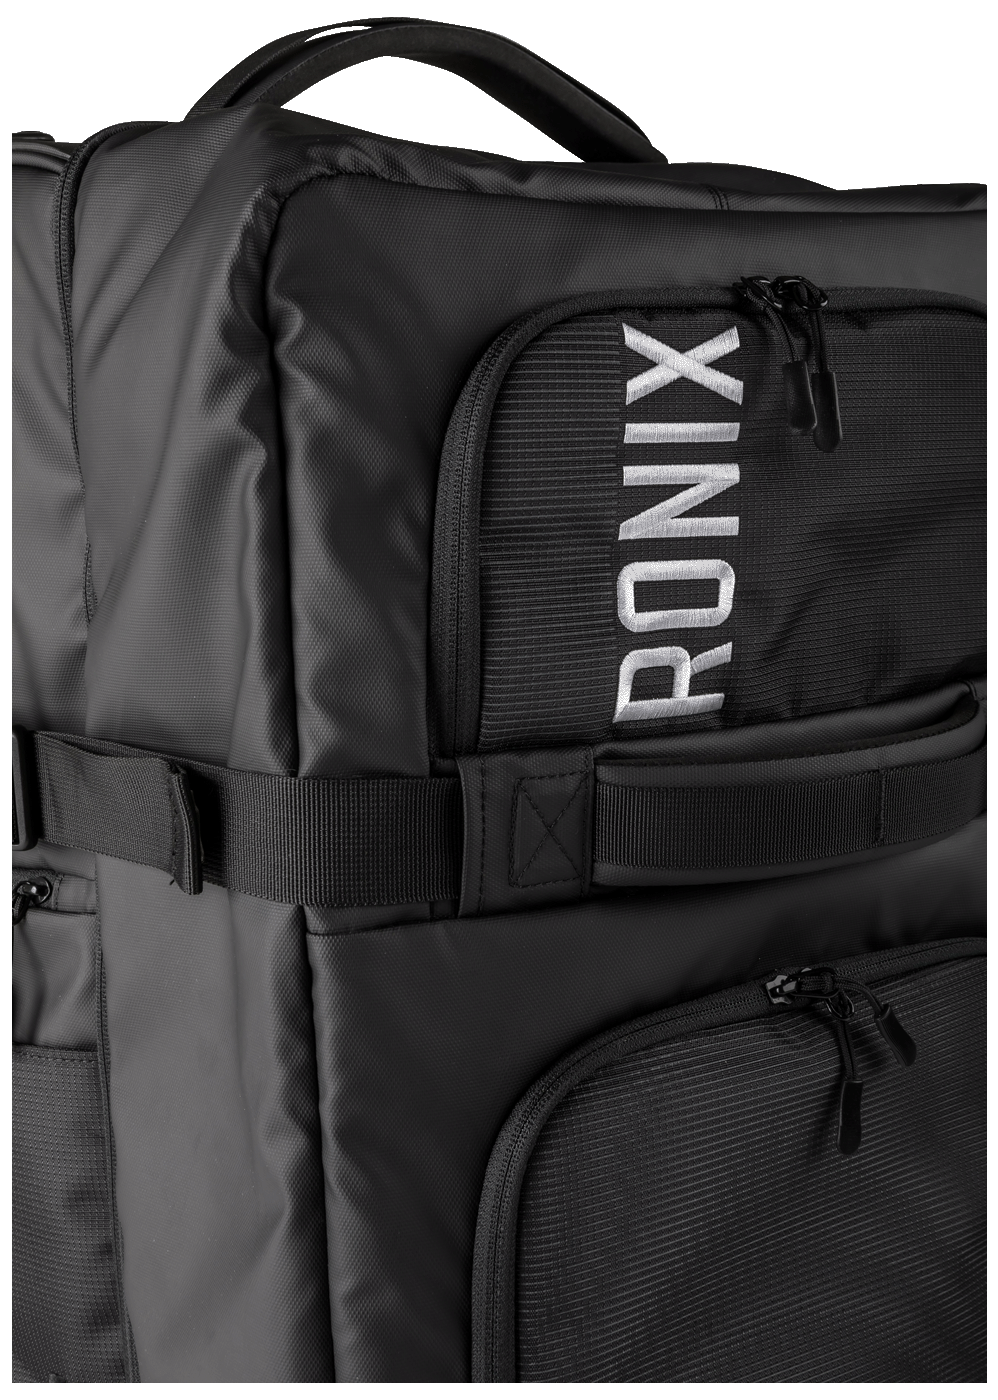 Ronix Transfer 2 Terminal Travel Check In Luggage